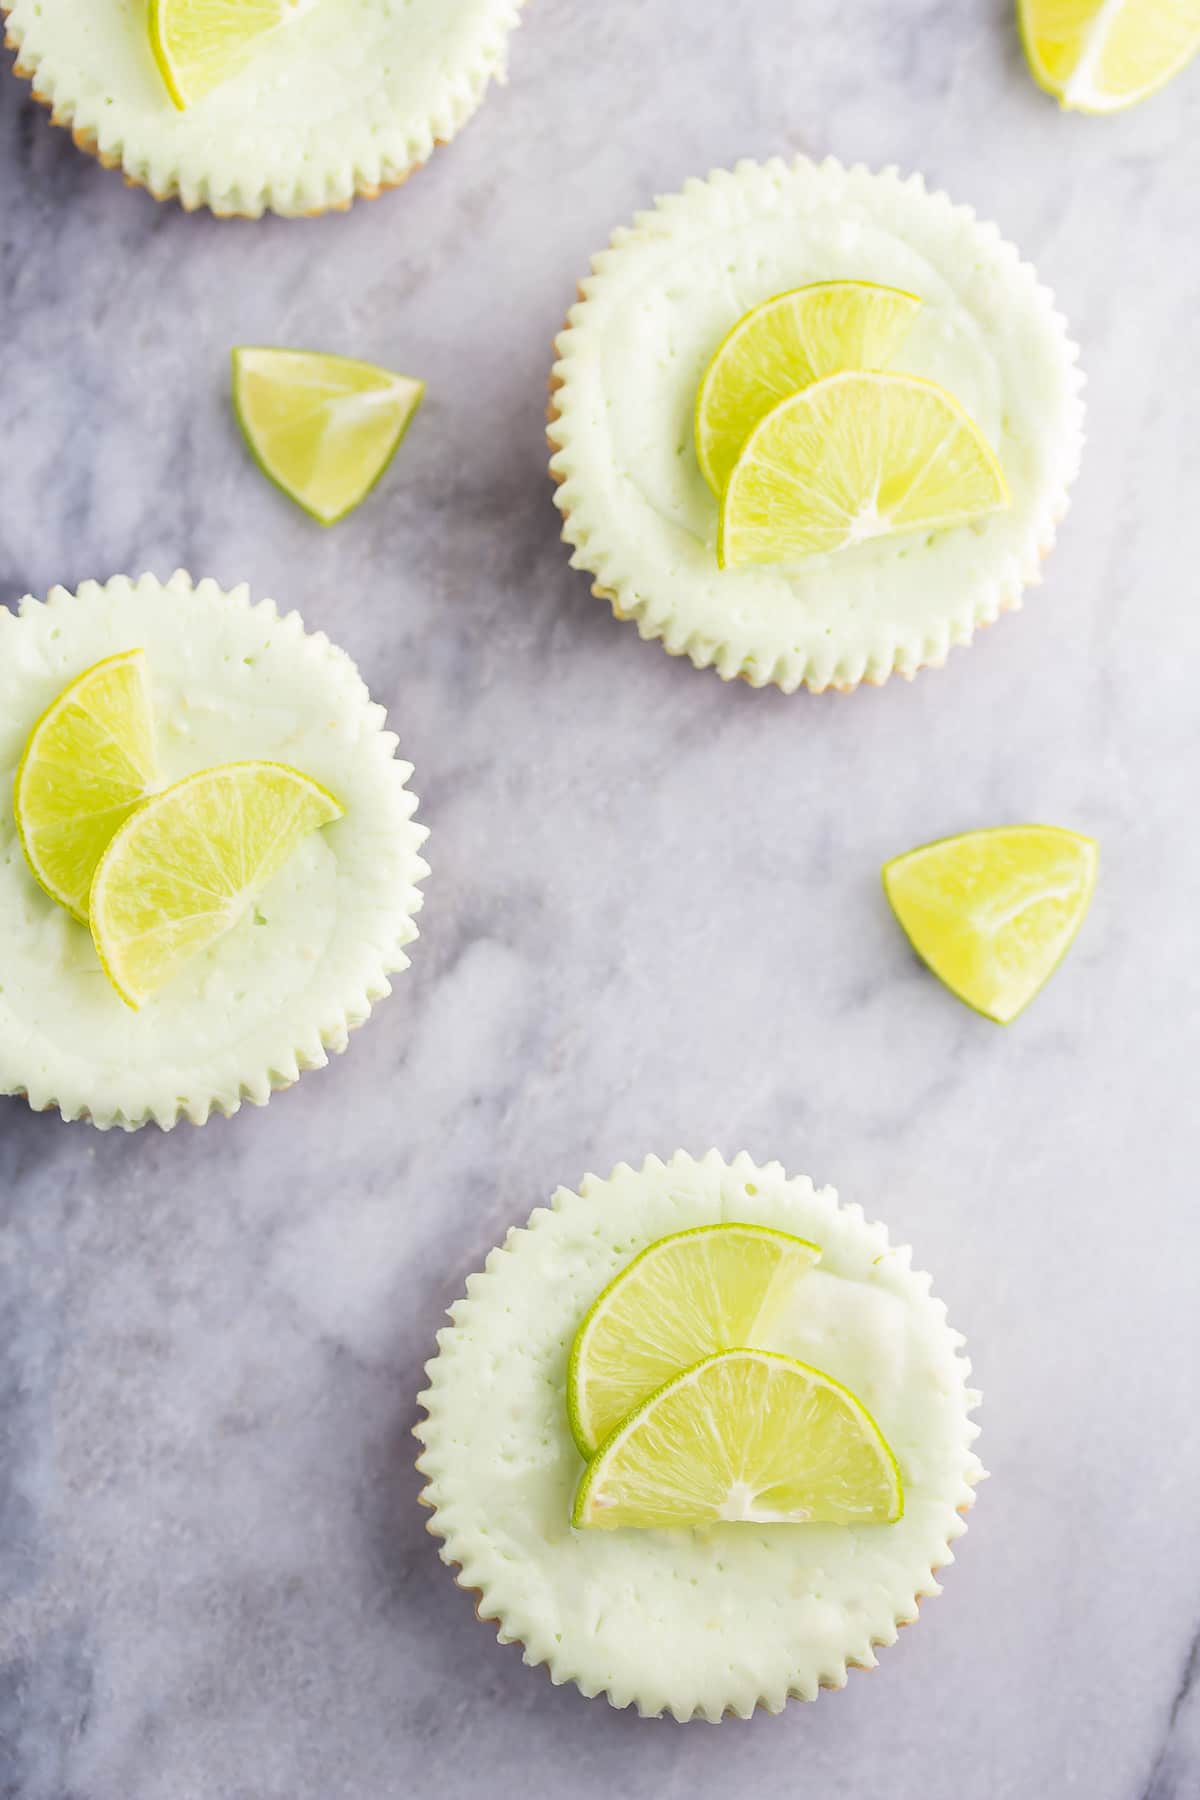 Key Lime Greek Yogurt Cheesecakes, a healthier dessert recipe with only 125 calories per cheesecake!